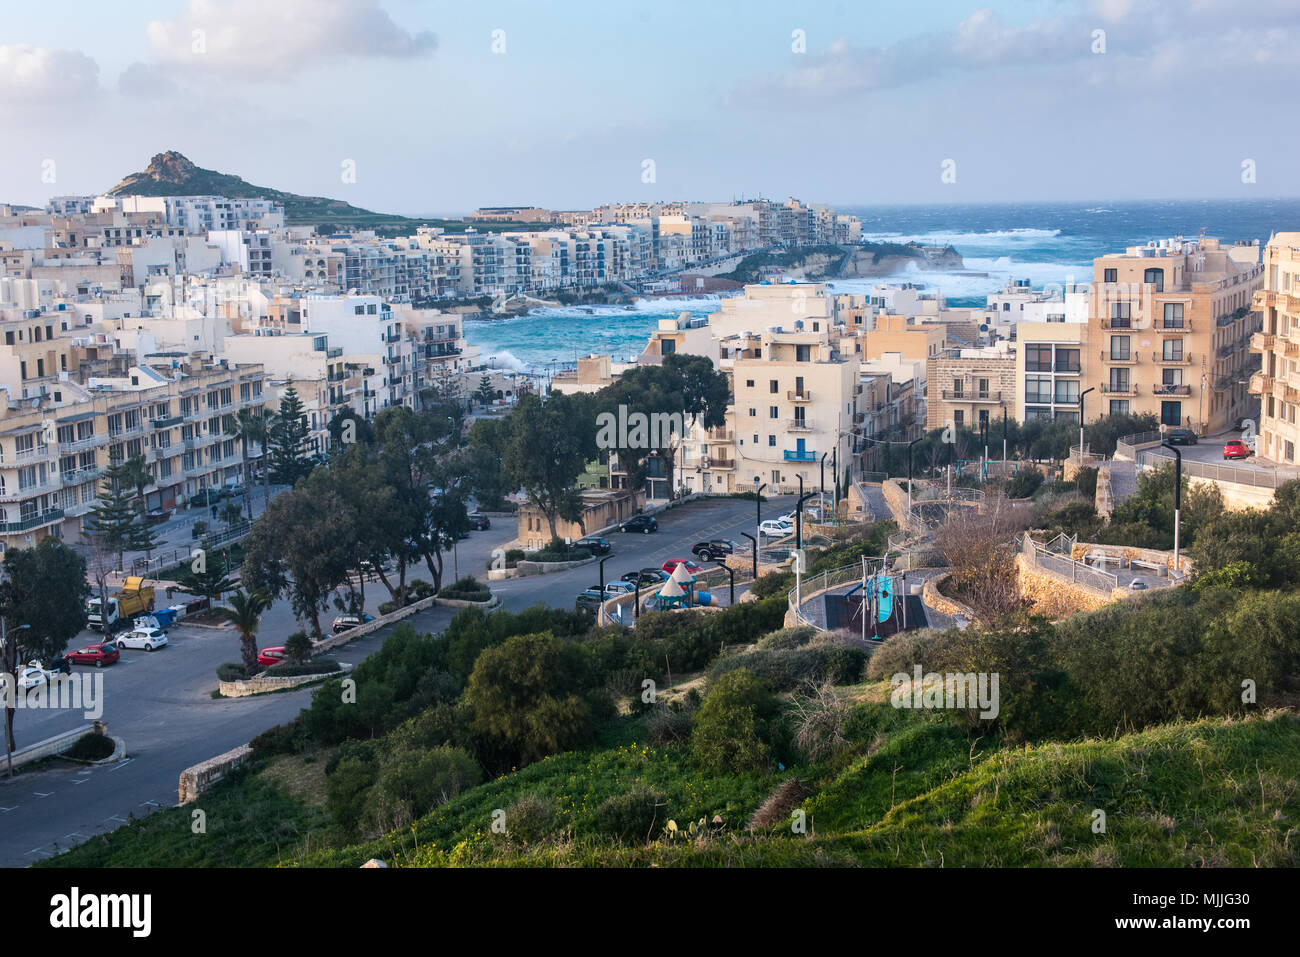 Marsalforn, Malta - January 2, 2018: The village of Marsalforn is on the north coast of Gozo, which is an island of the Maltese archipelago and the second-largest island of Malta. Stock Photo